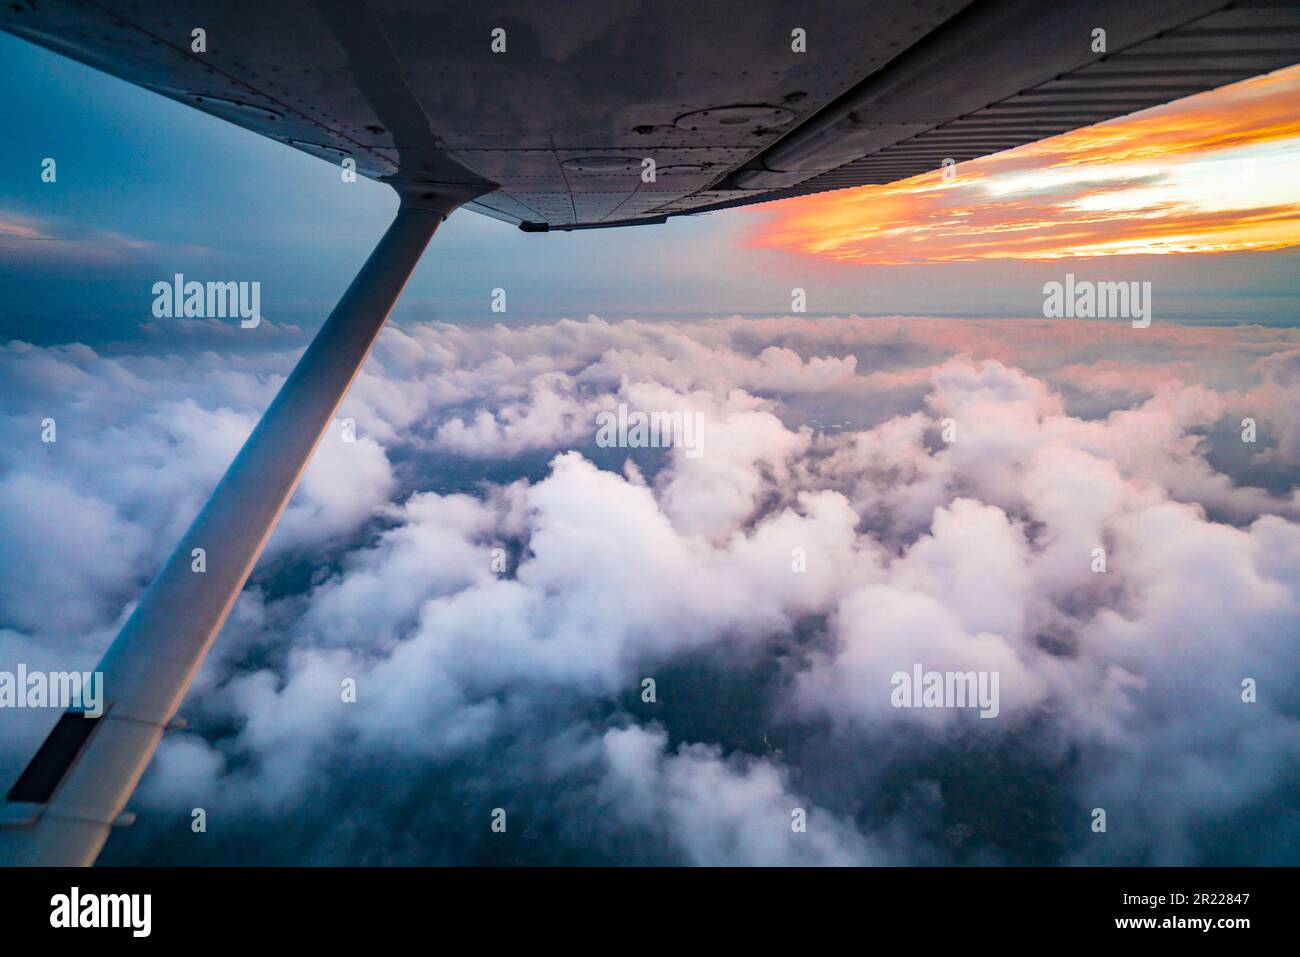 Aerial view of colorful sky at sunset as seen from a single engine plane, Stock Photo